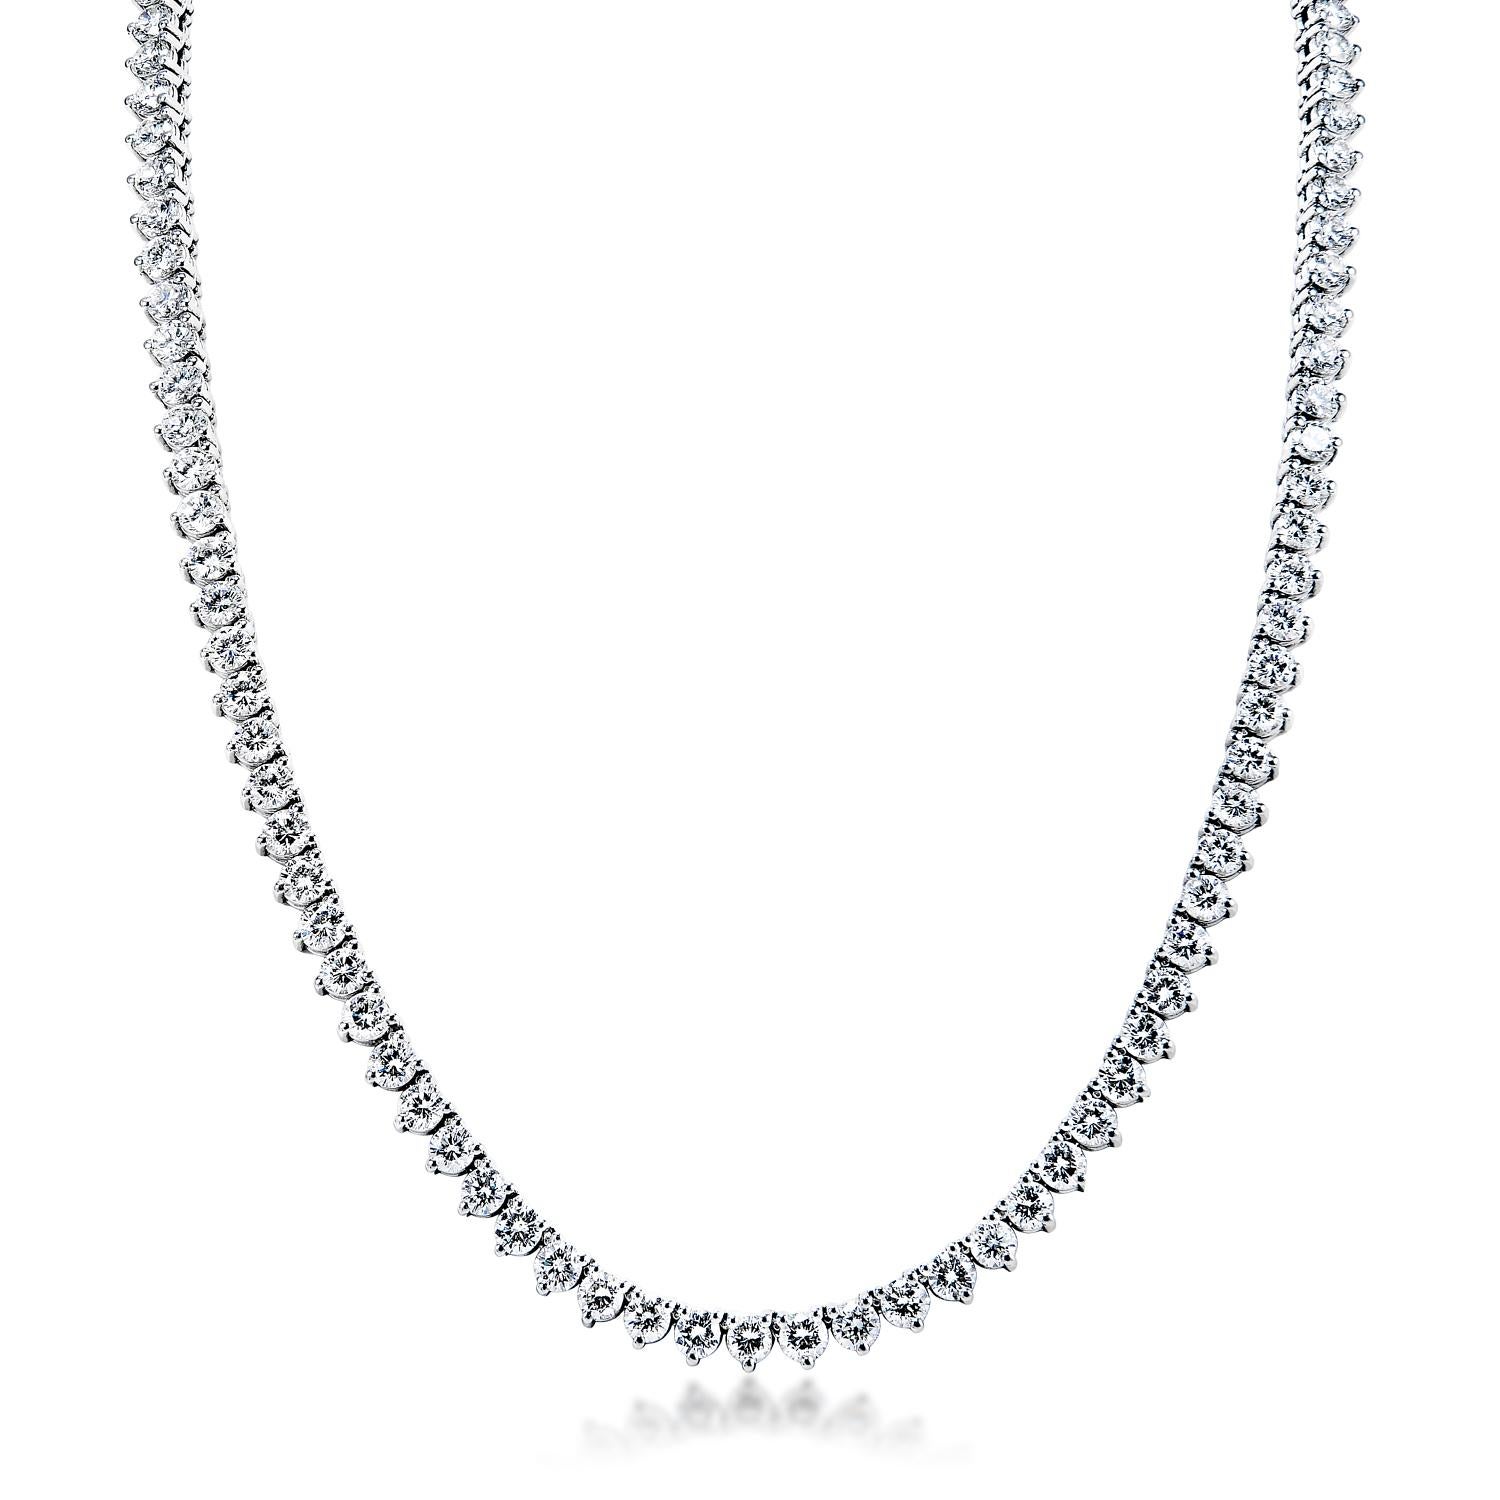 Earth Mined Diamond Riviera Graduated Necklace for Ladies:

Number of Diamonds: 154
Carat Weight: 36.70 Carats
Style: Round Brilliant Cut
Setting: 3 Round Prong
Chains: 14 Karat White Gold 56.00 grams